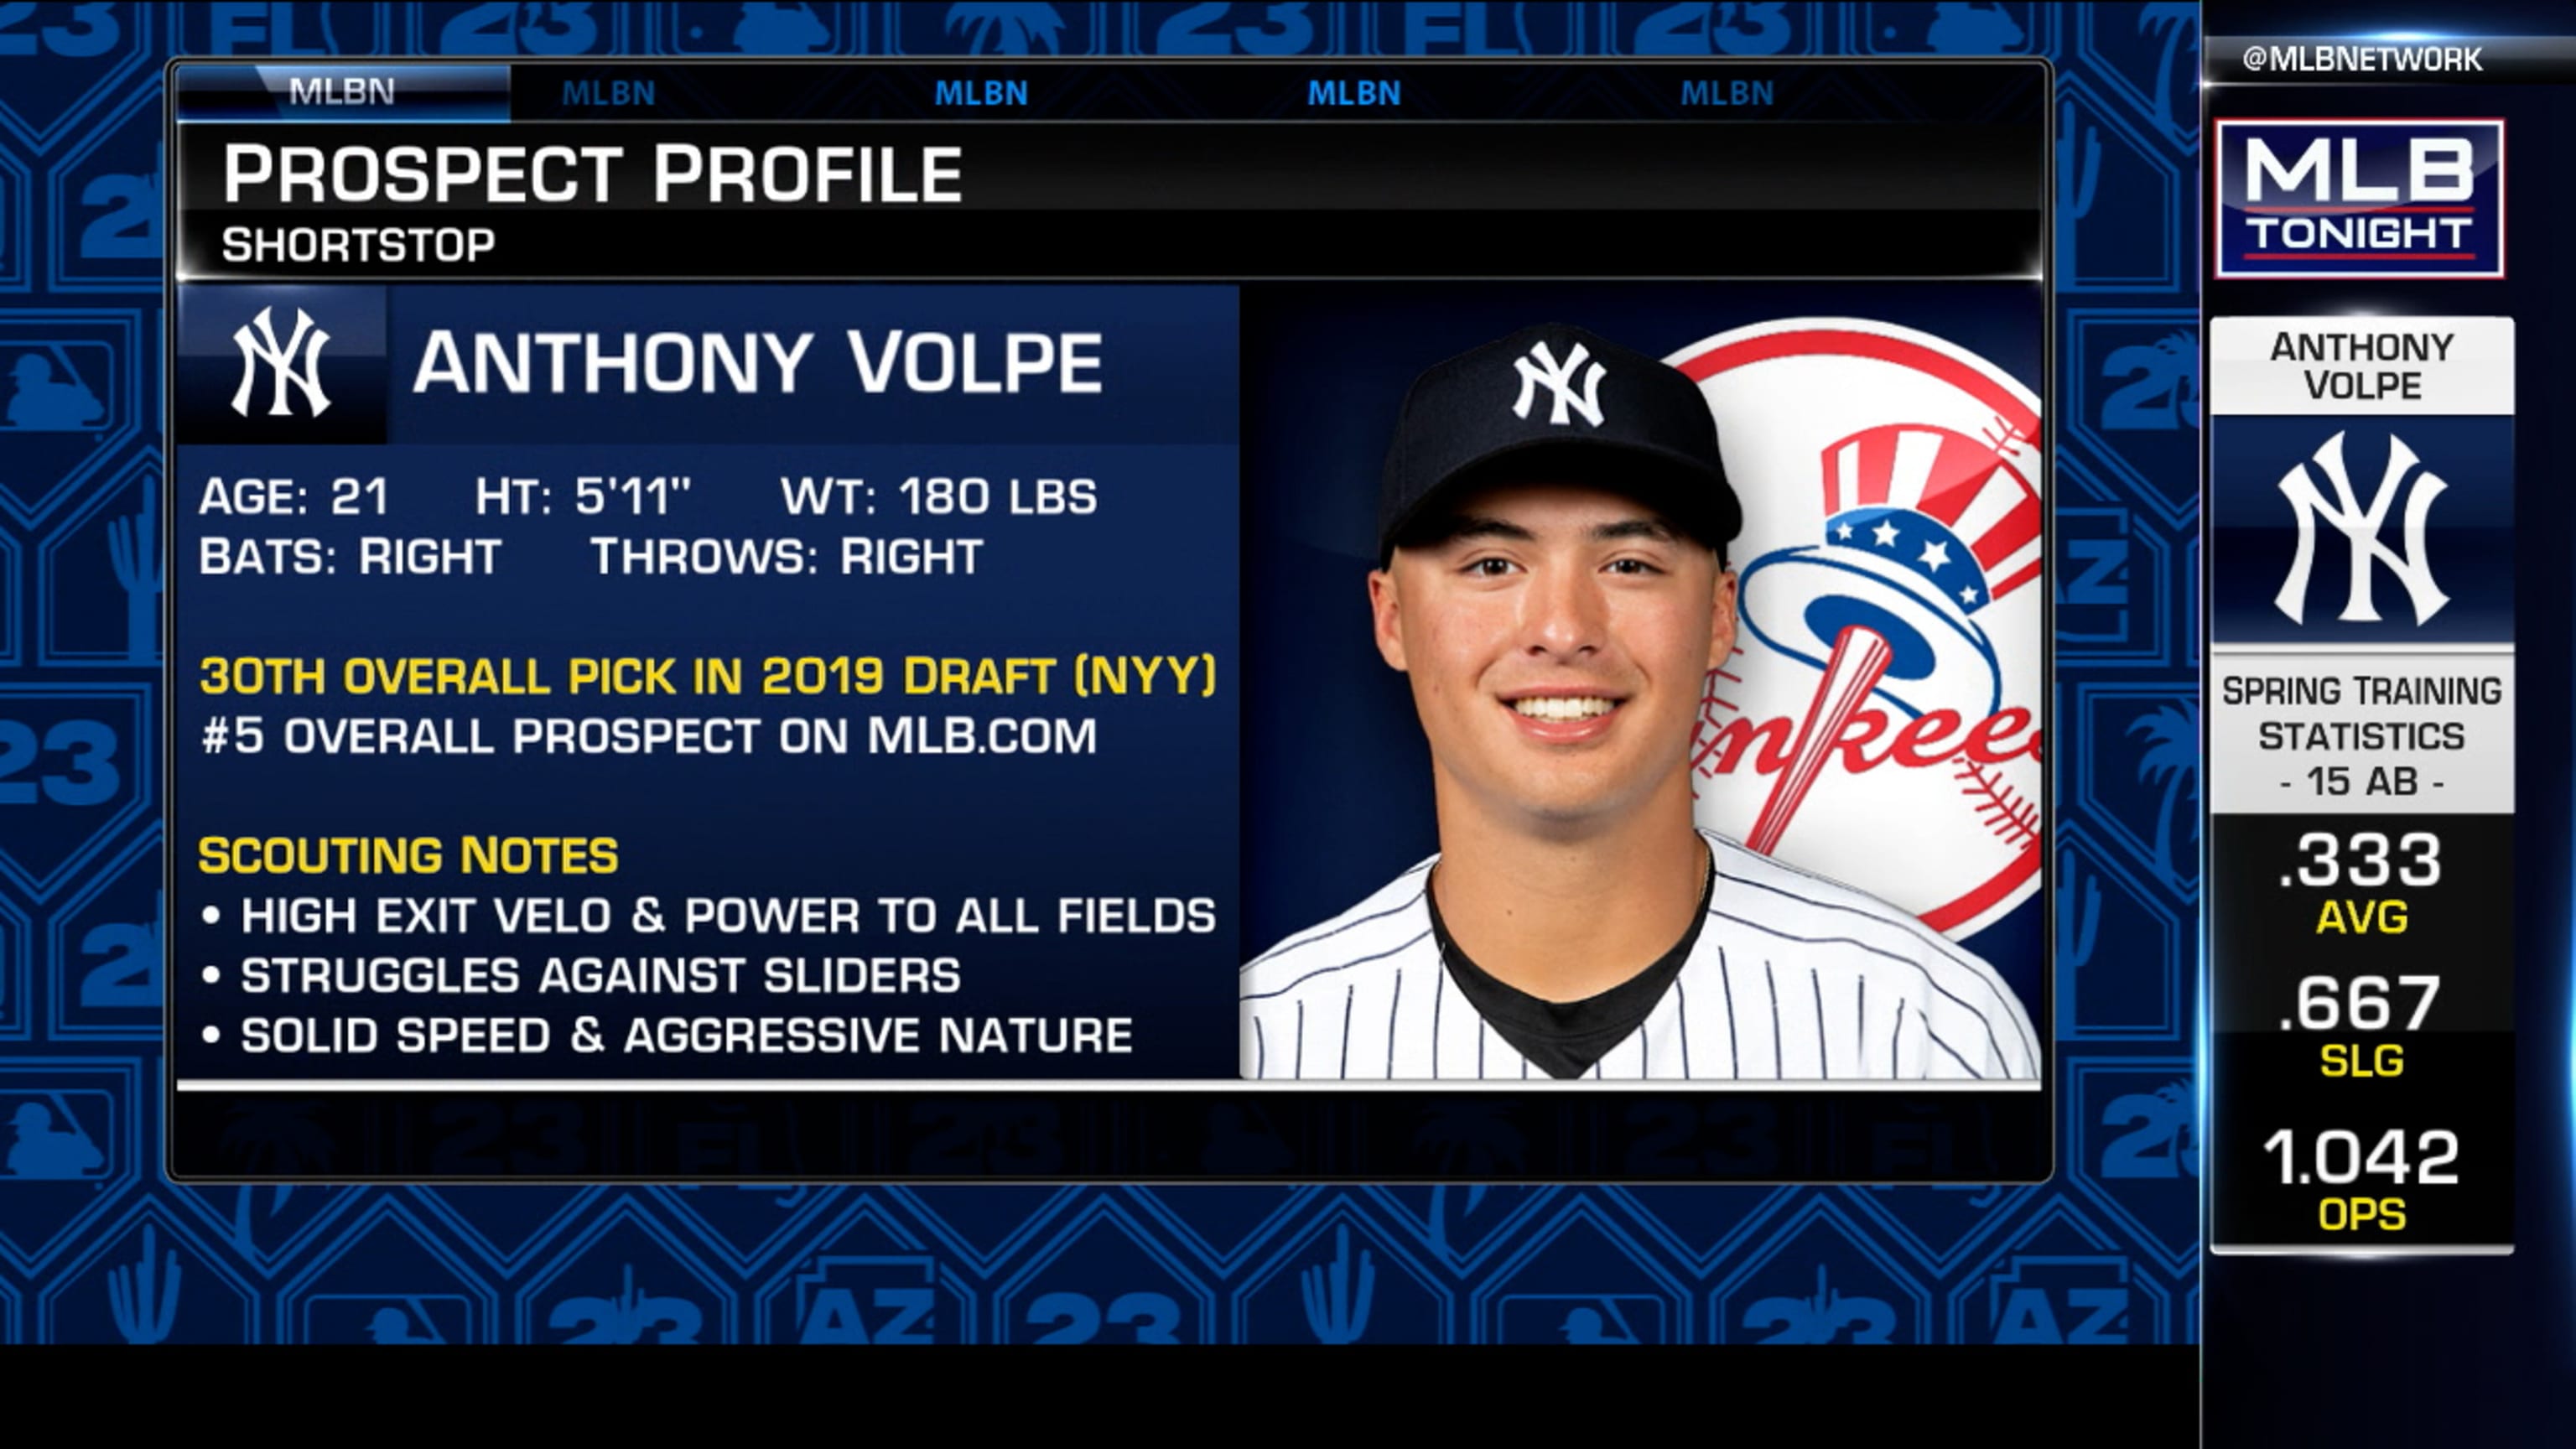 Who is Yankees shortstop Anthony Volpe?